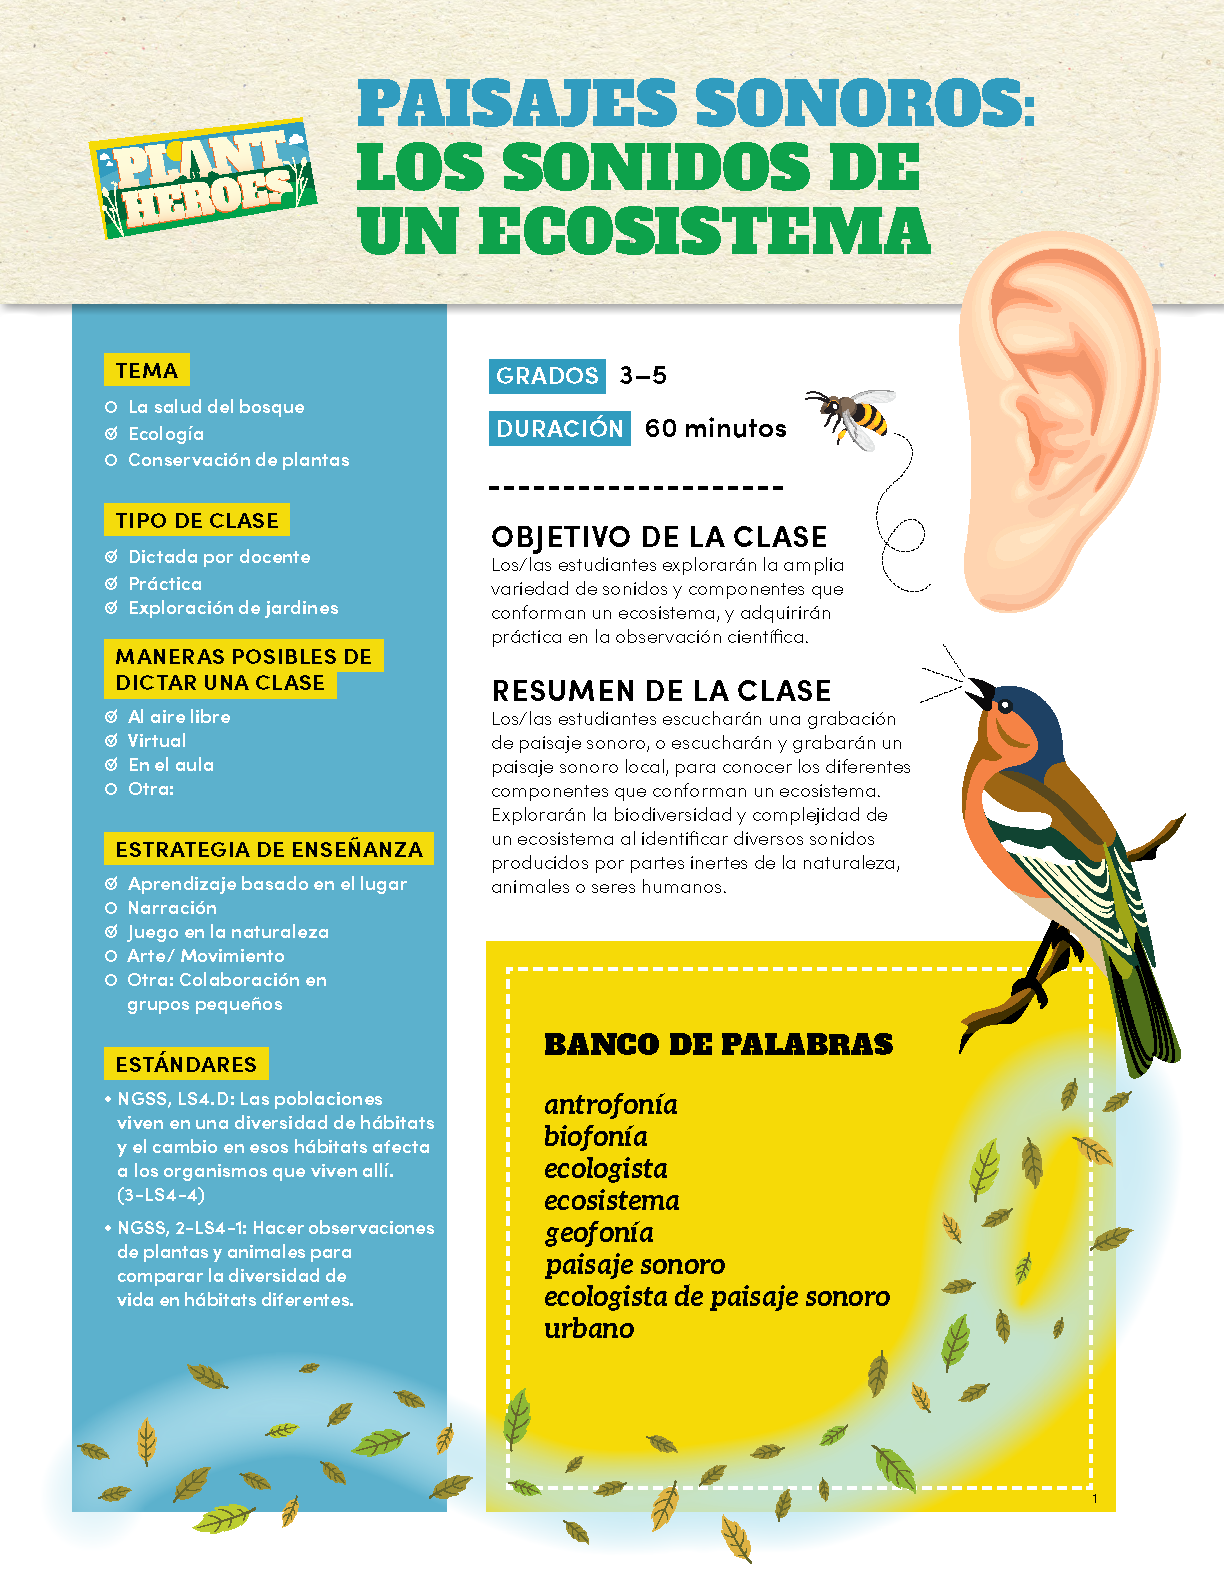 front cover images of the soundscapes lesson plan with an image of an ear, singing bird and wind blowing.